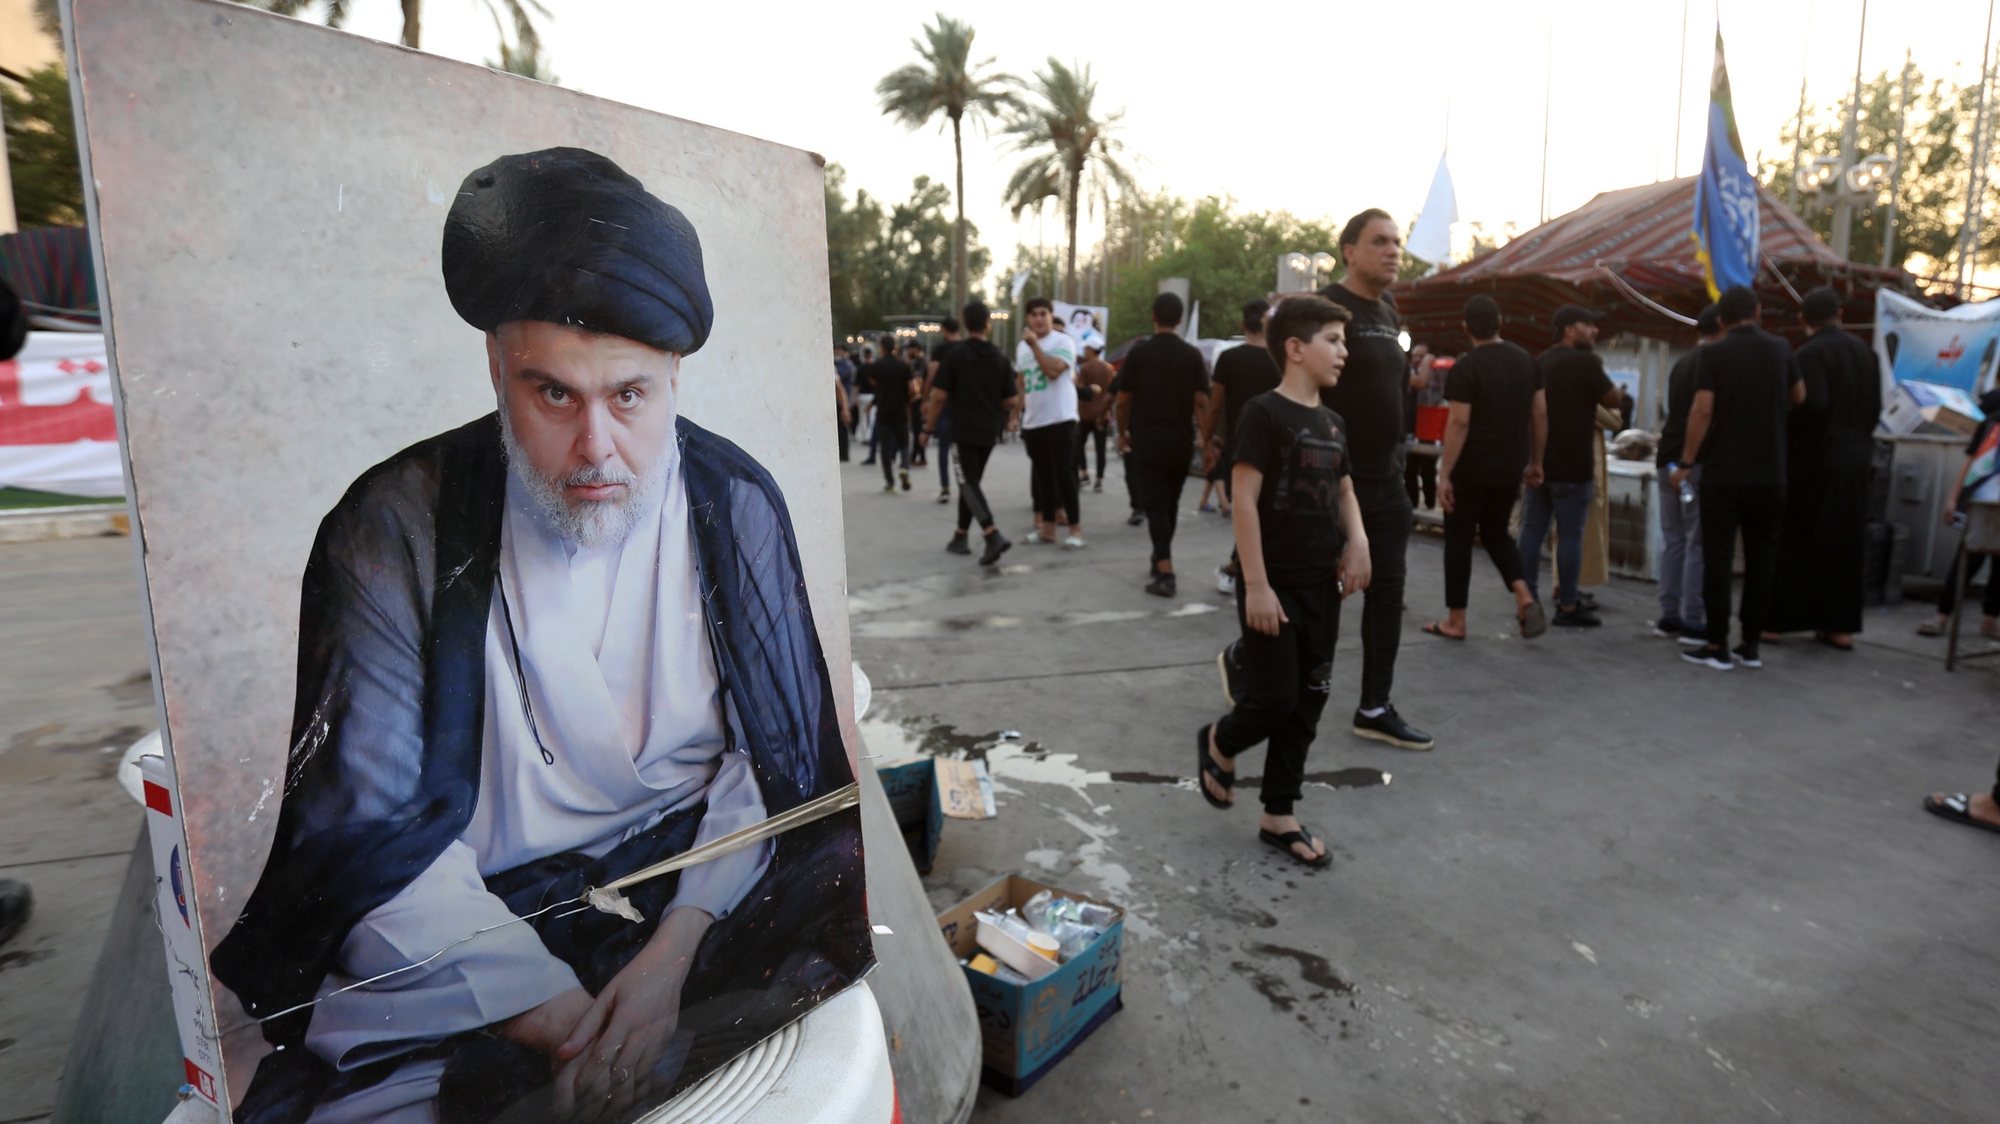 epa10114940 Supporters of Iraqi Shiite cleric Muqtada al-Sadr, head of the Sadrist movement walk next to the Iraqi parliament building, Baghdad, Iraq, 10 August 2022. Sadrist Movement leader Muqtada al-Sadr called on the Iraqi judiciary to dissolve the parliament by the &#039;end of next week&#039; and task the president with setting early parliament elections. Thousends of the al-Sadr followers stormed the Iraqi parliament building in the heavily fortified Green Zone, home to government buildings and foreign embassies in Baghdad on 31 July 2022.  EPA/AHMED JALIL